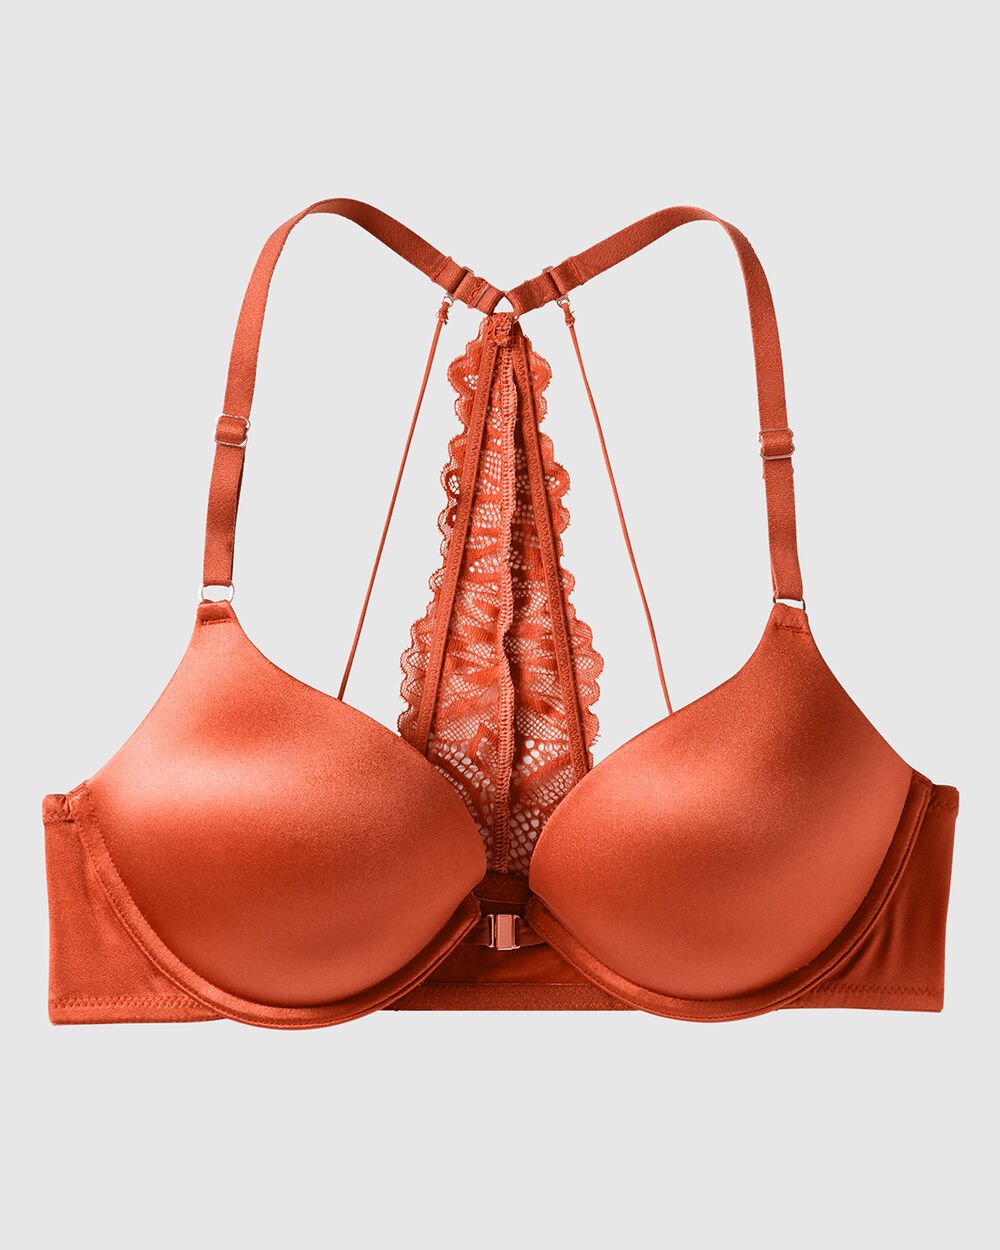 Sexy Front Closure Bra Lace Gather Lingerie Push Up Bra Ultimates